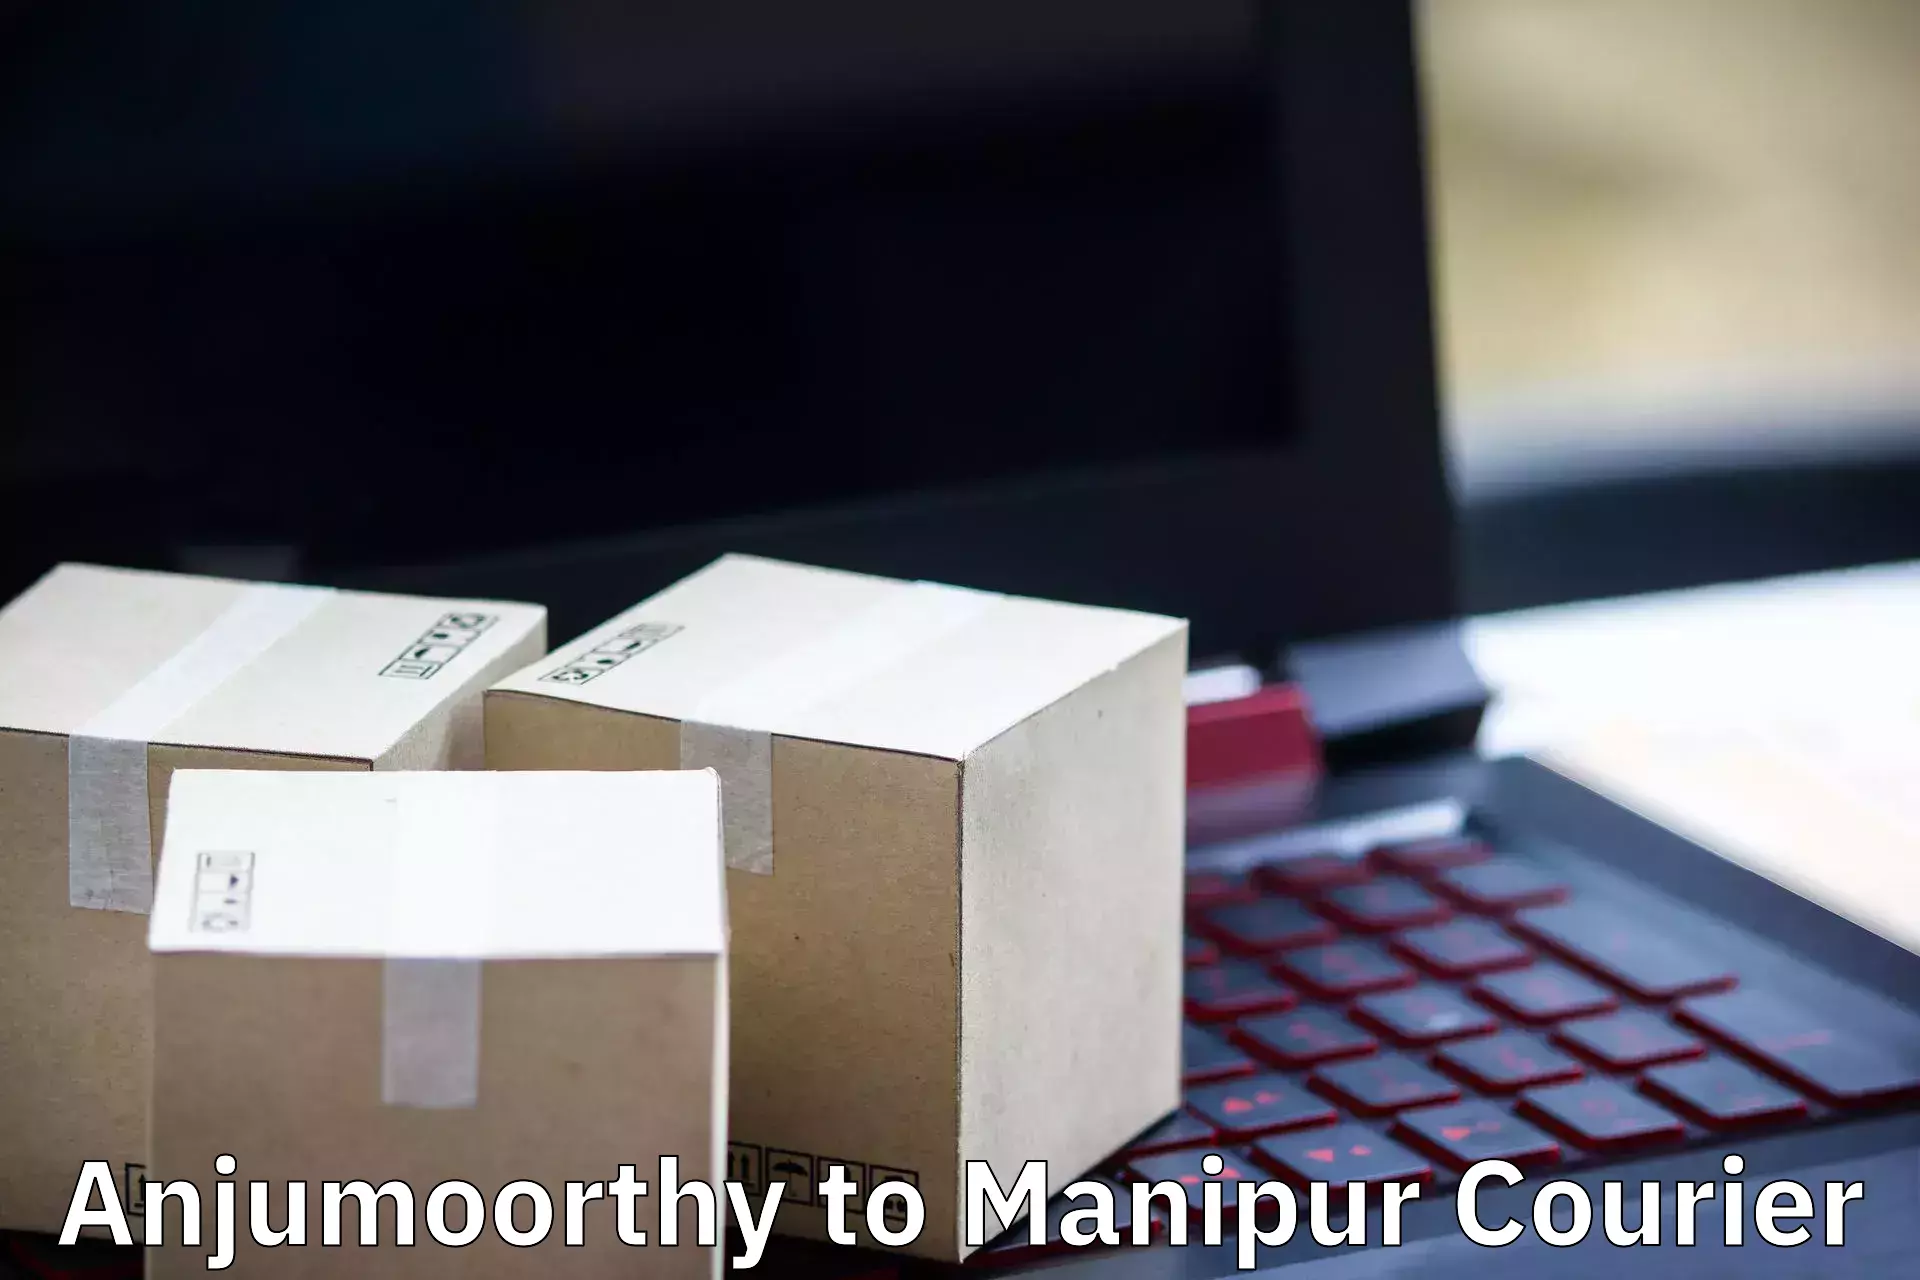 Trusted relocation experts Anjumoorthy to Manipur